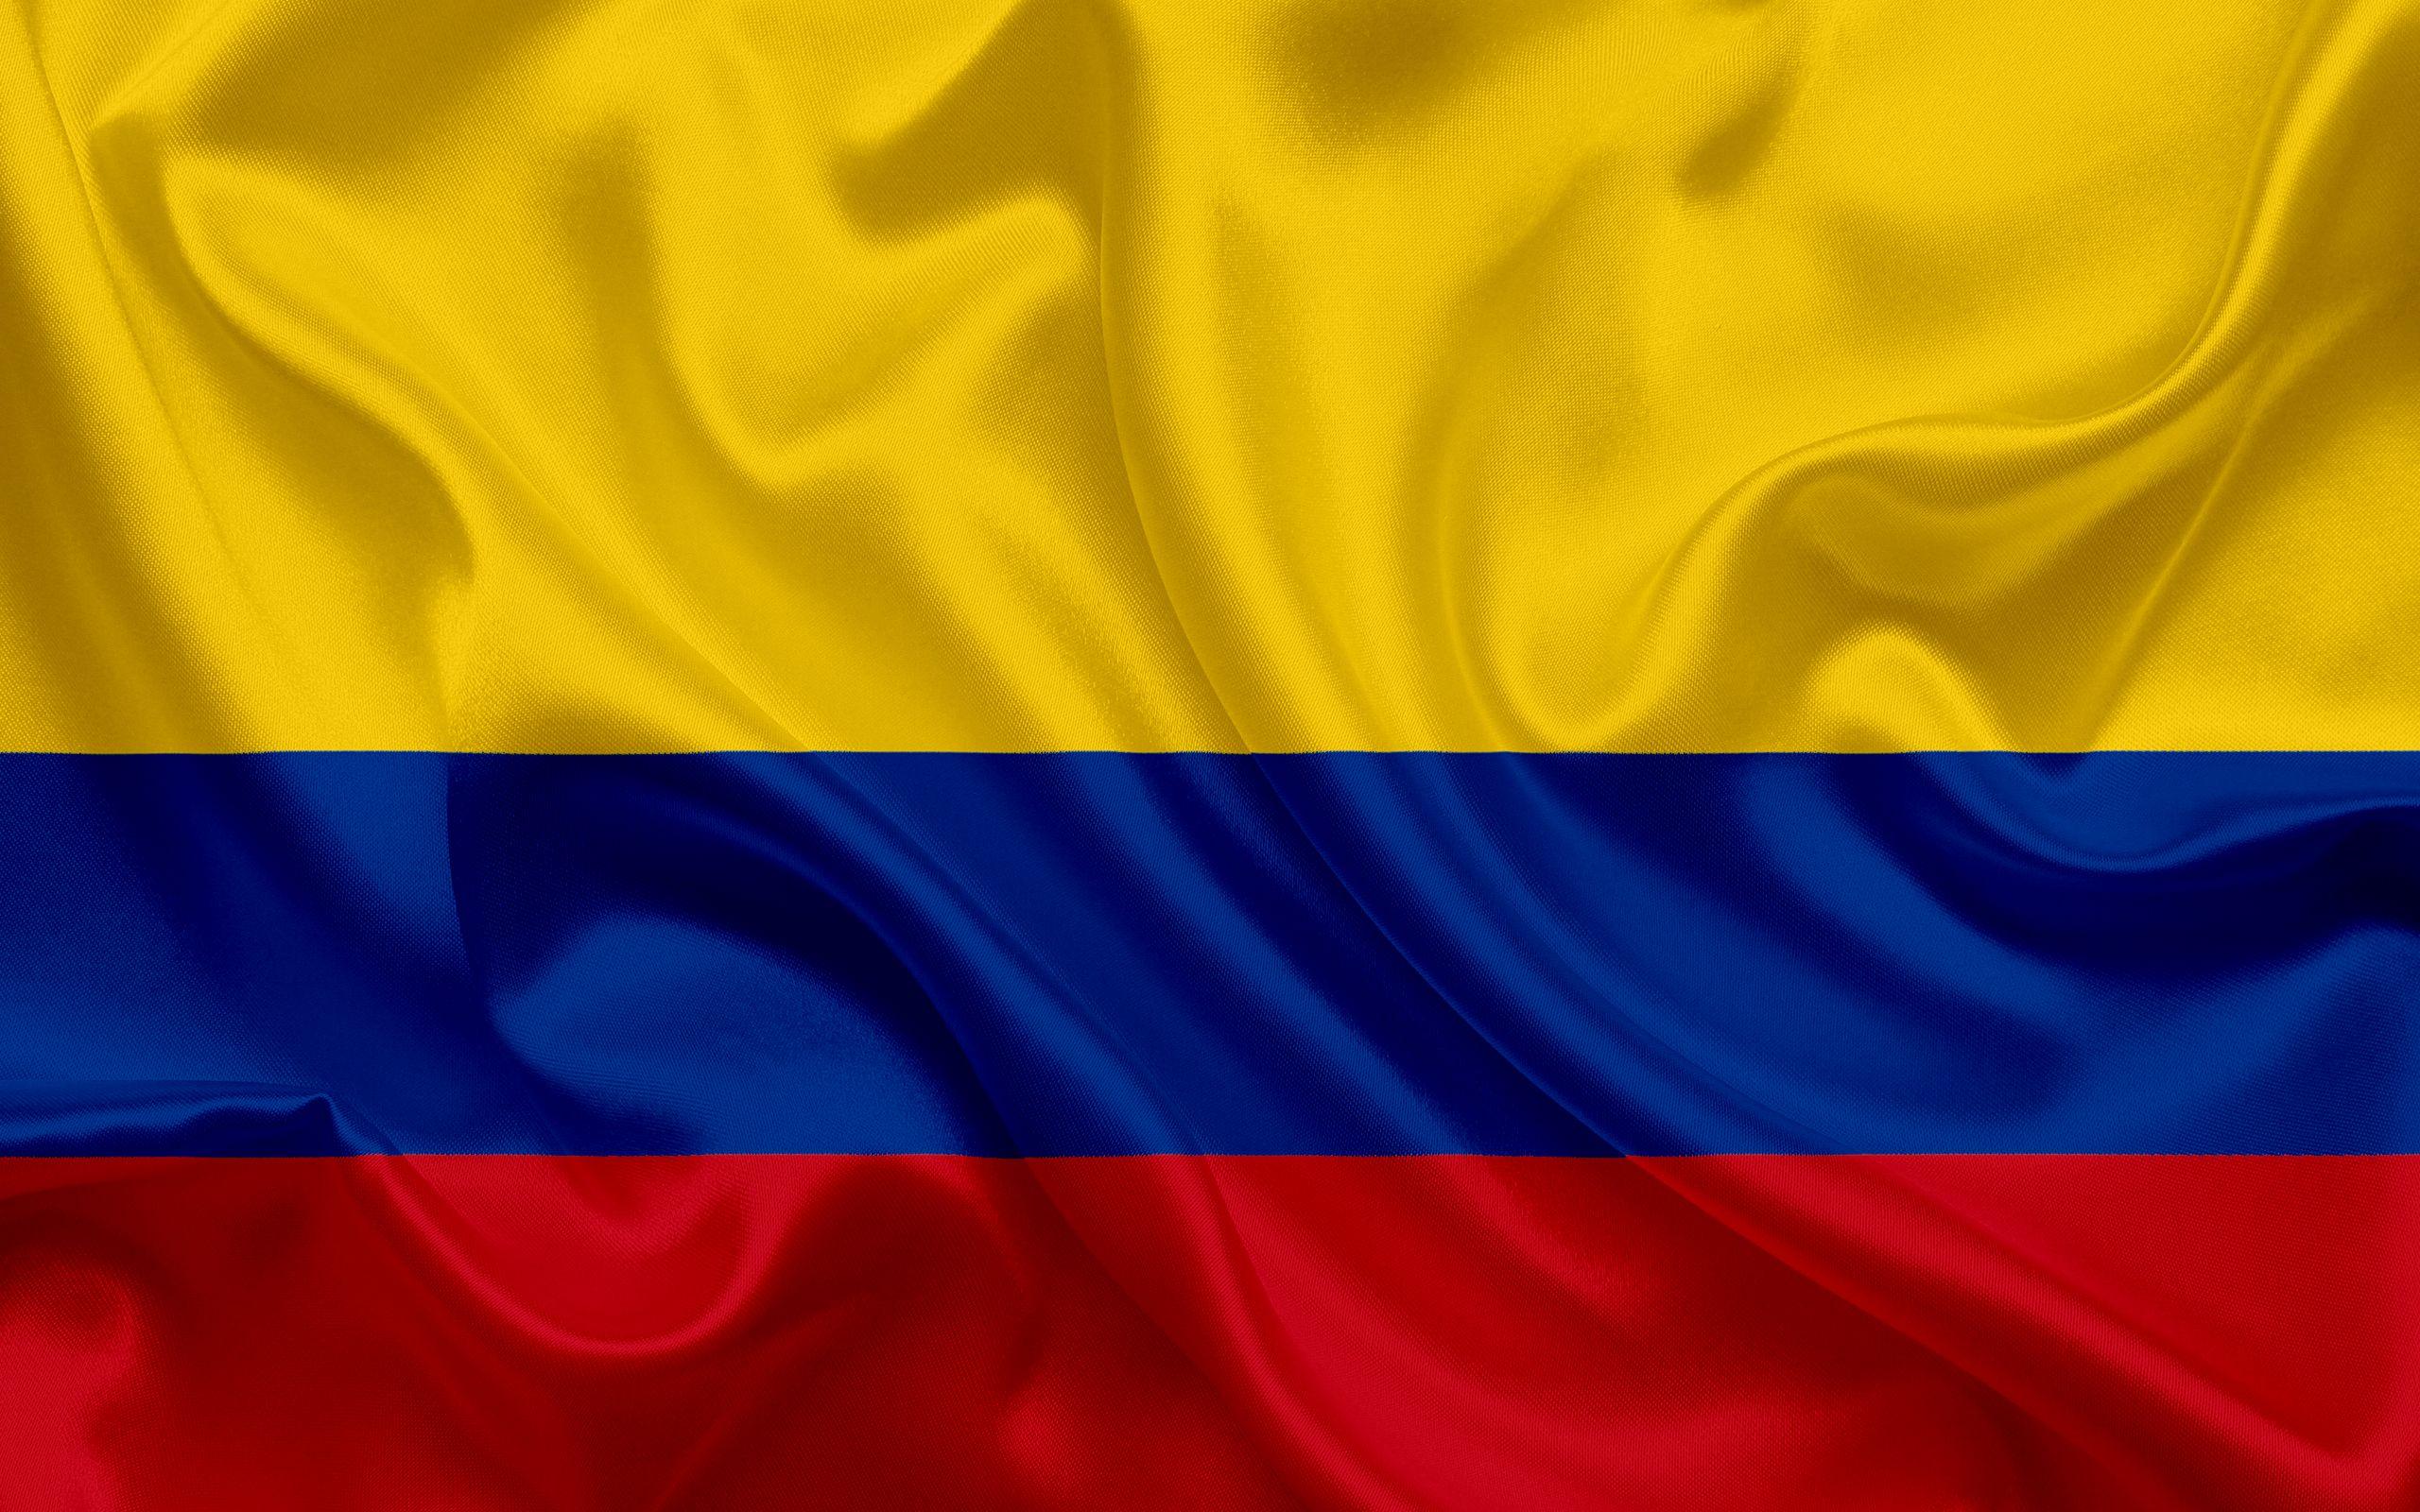 Download wallpaper Colombian flag, Colombia, South America, silk